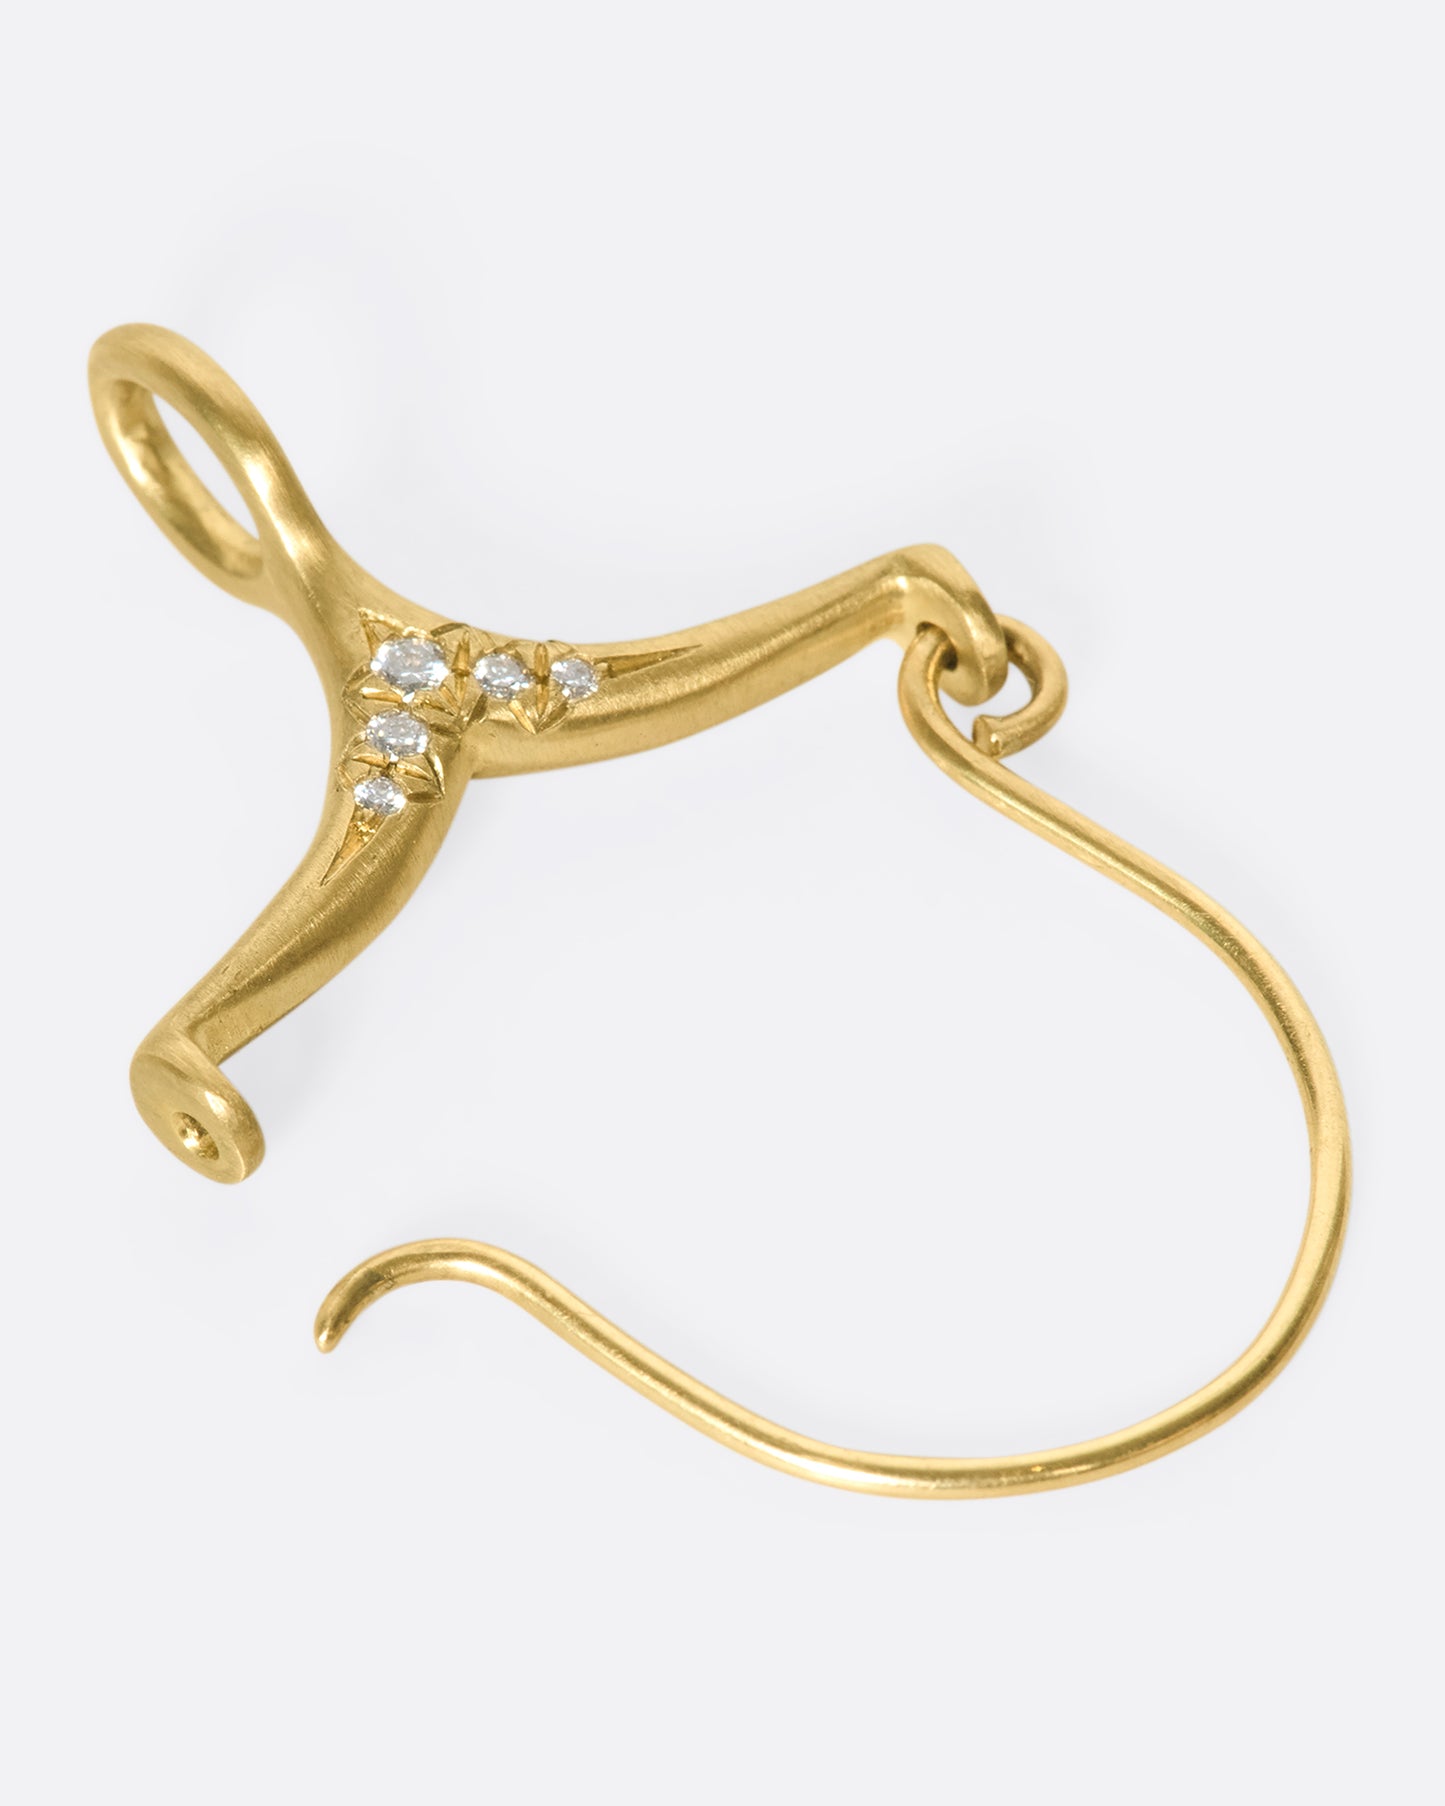 A gold and diamond charm holder laying down and open.